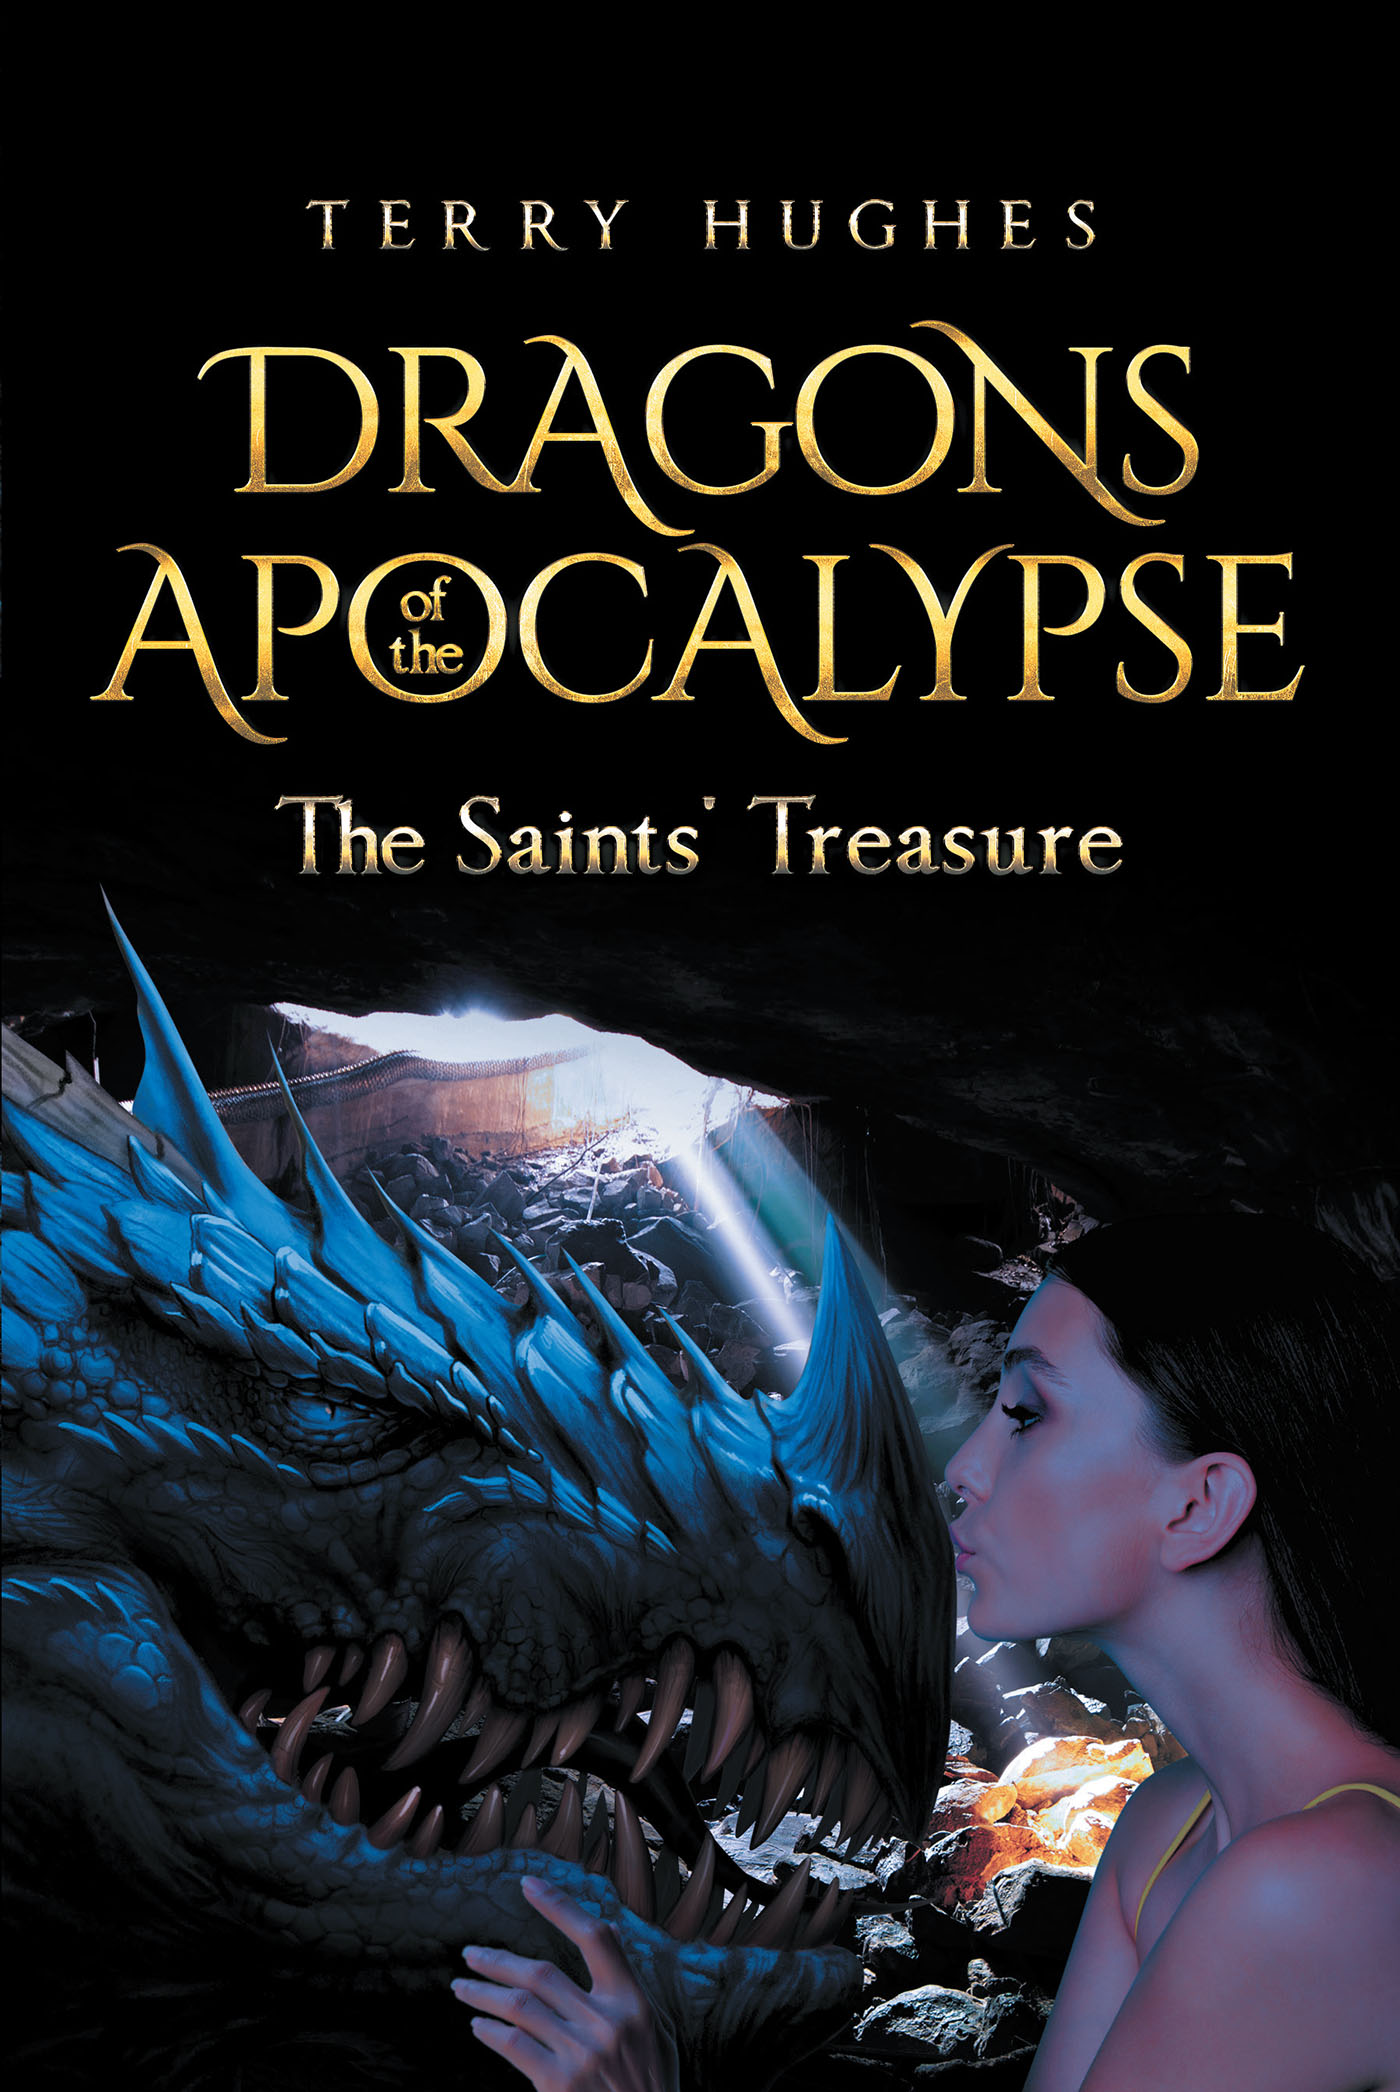 Author Terry Hughes’s New Book, "Dragons of the Apocalypse: The Saints’ Treasure," Follows a Father & His Three Daughters as They Hunt for the Remaining Divine Treasures